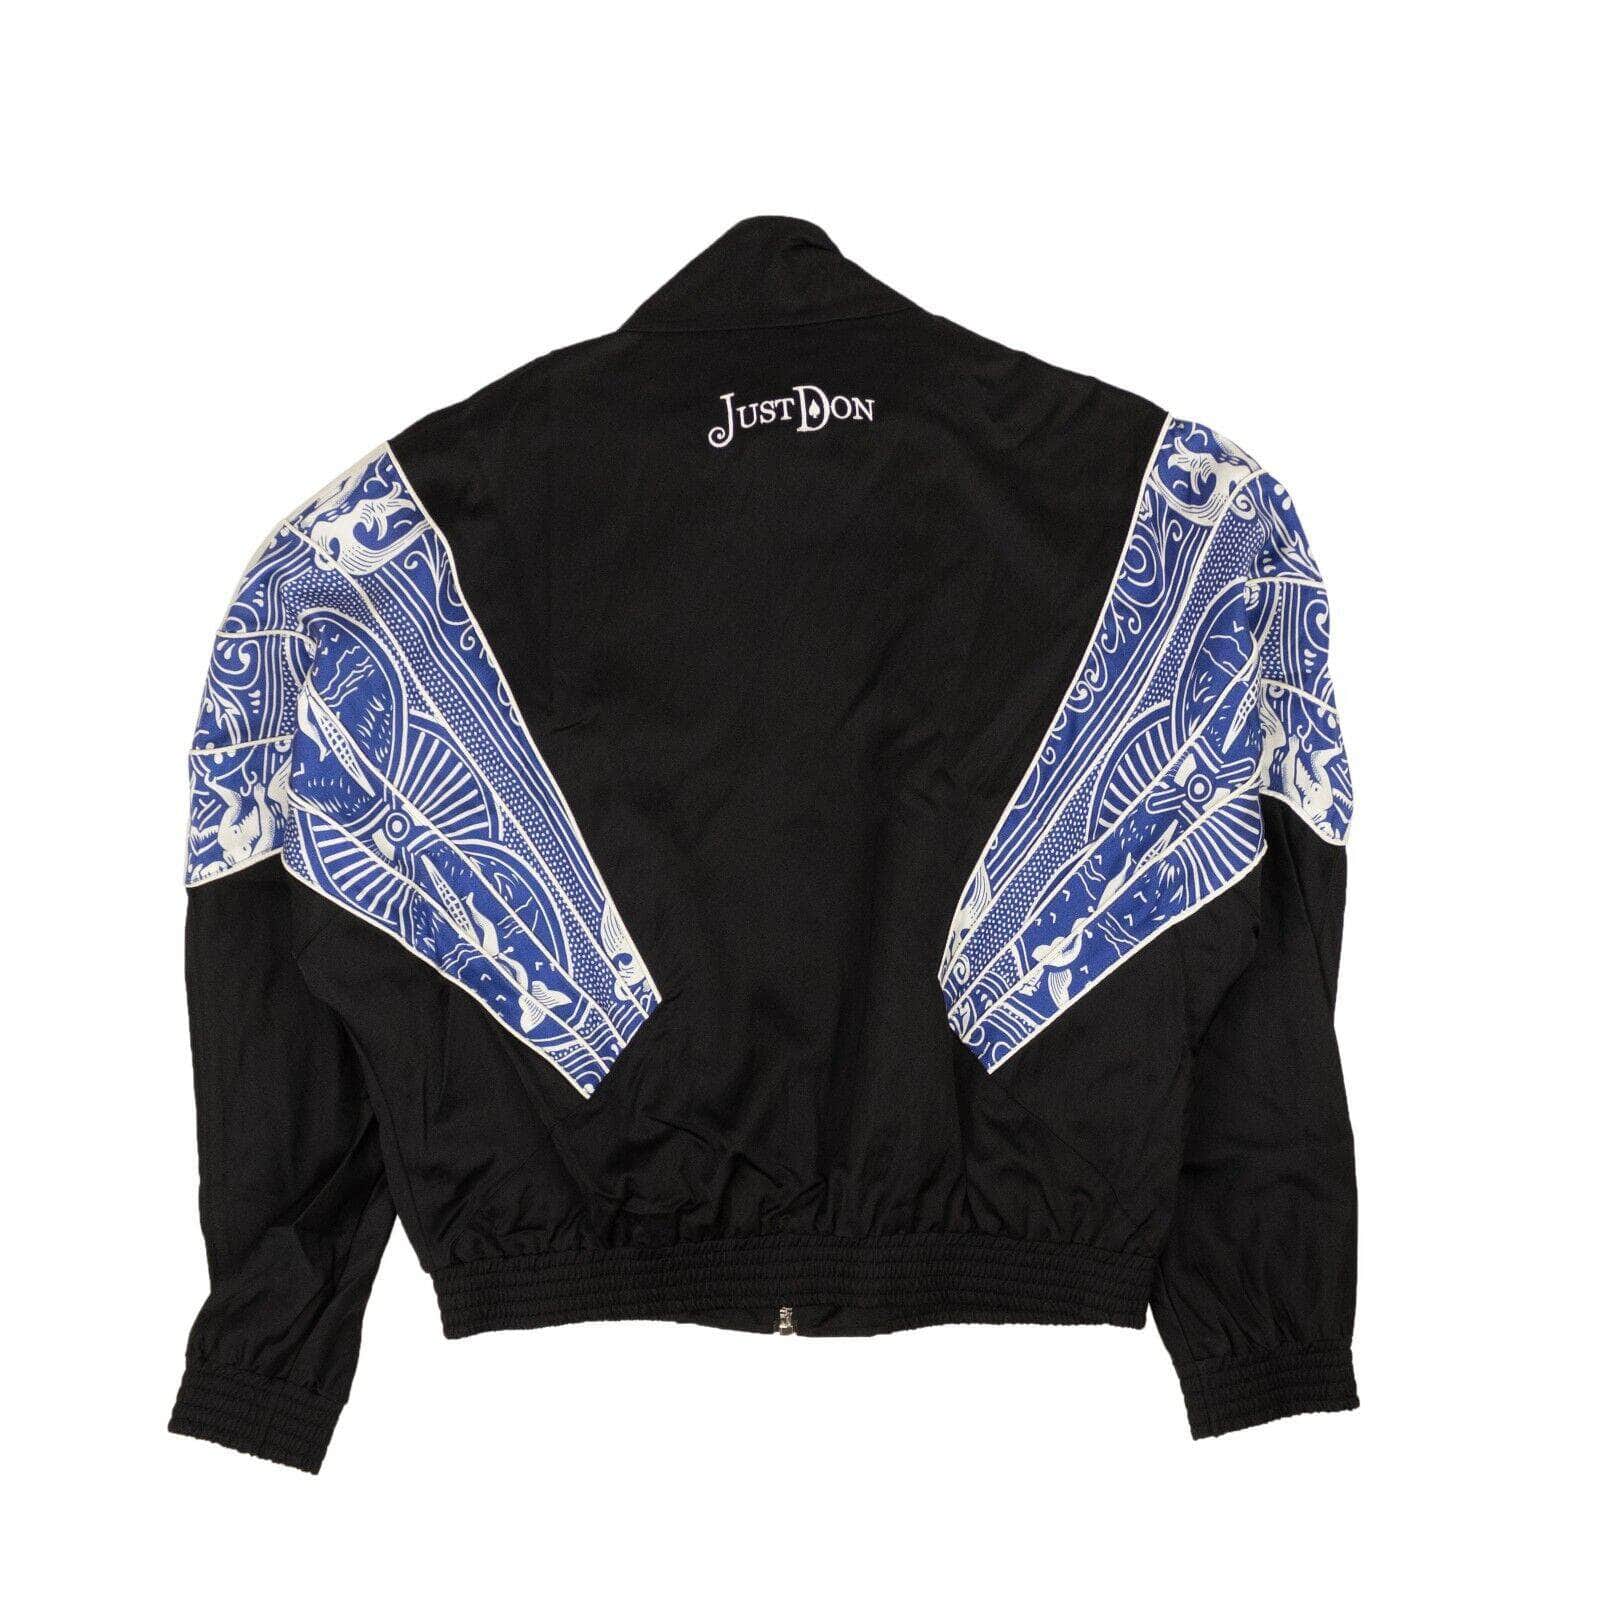 Just Don 1000-2000, channelenable-all, chicmi, couponcollection, gender-mens, just-don, main-clothing, mens-shoes, mens-varsity-jackets, size-m M Black Card Dealer Lightweight Jacket JSD-XOTW-0002/M JSD-XOTW-0002/M